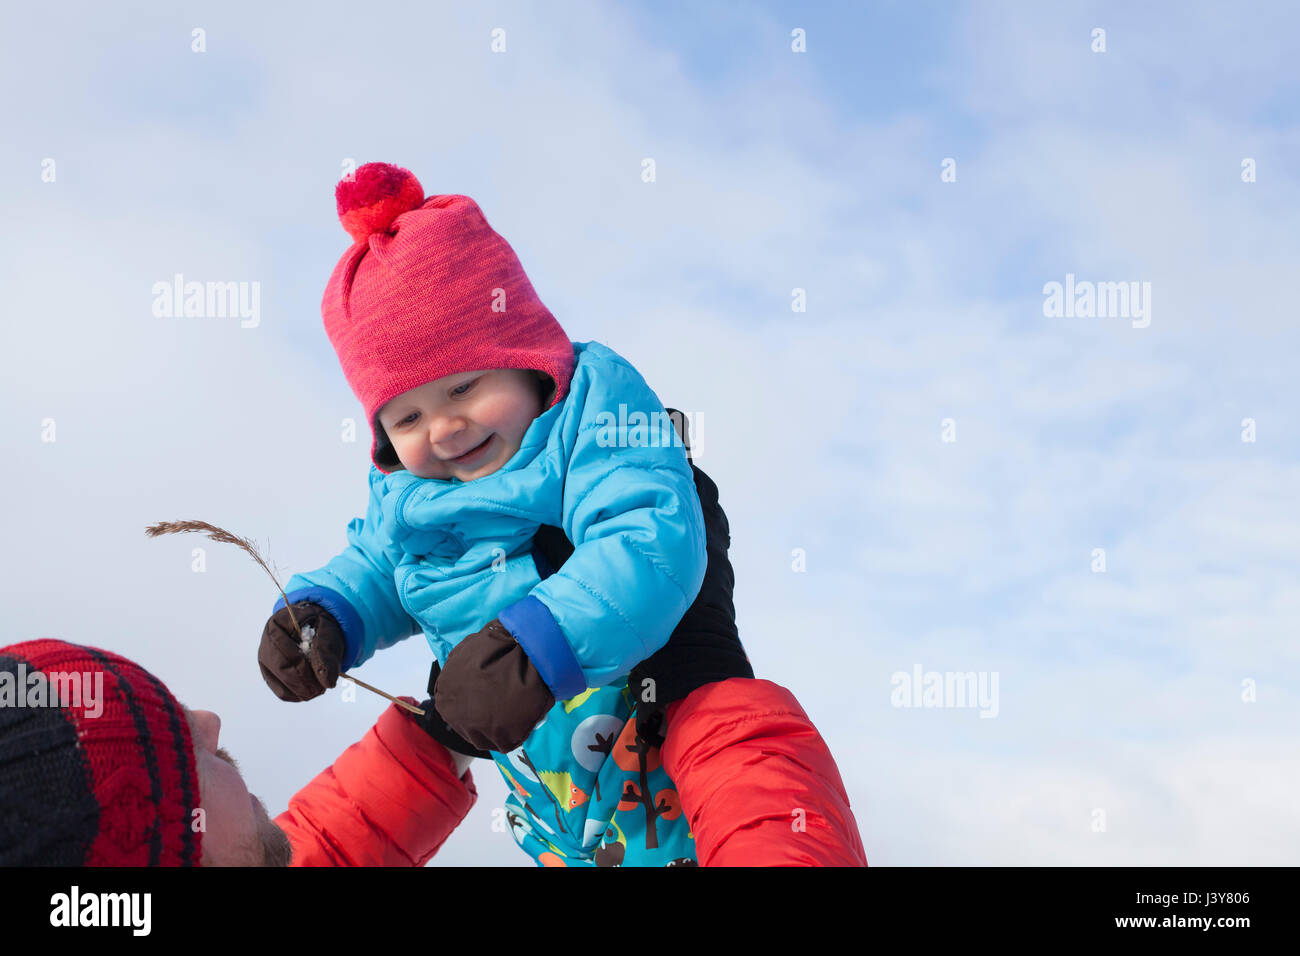 Father lifting young son in air, in snow covered landscape Stock Photo